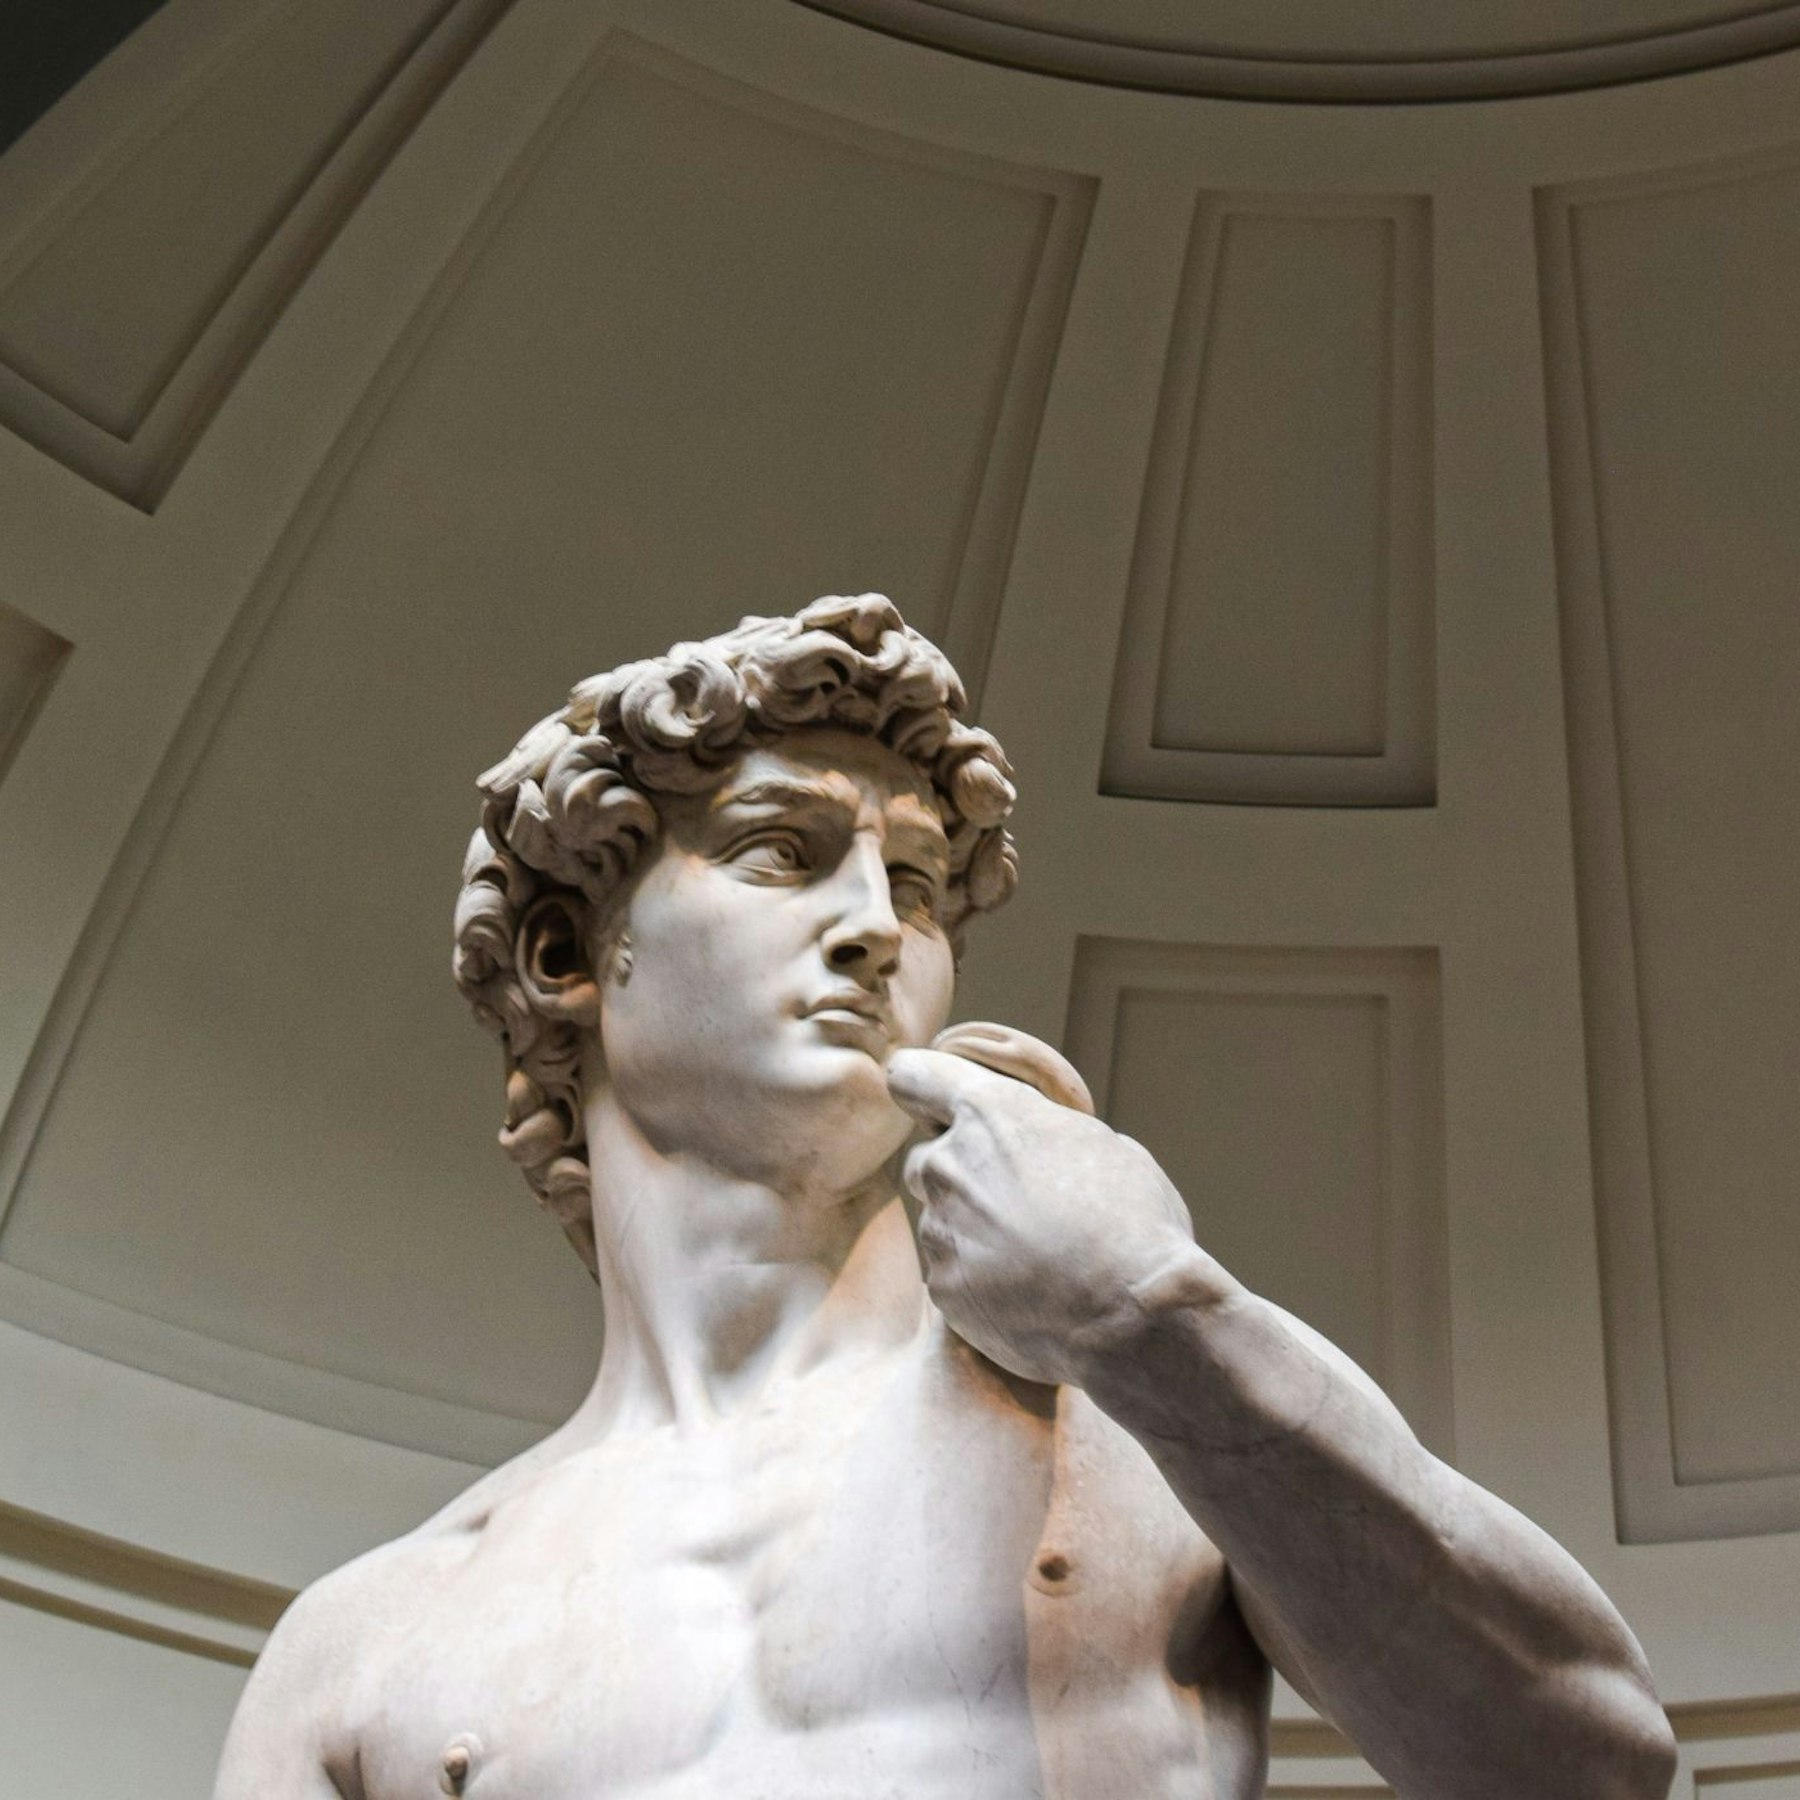 See the artworks of Michelangelo